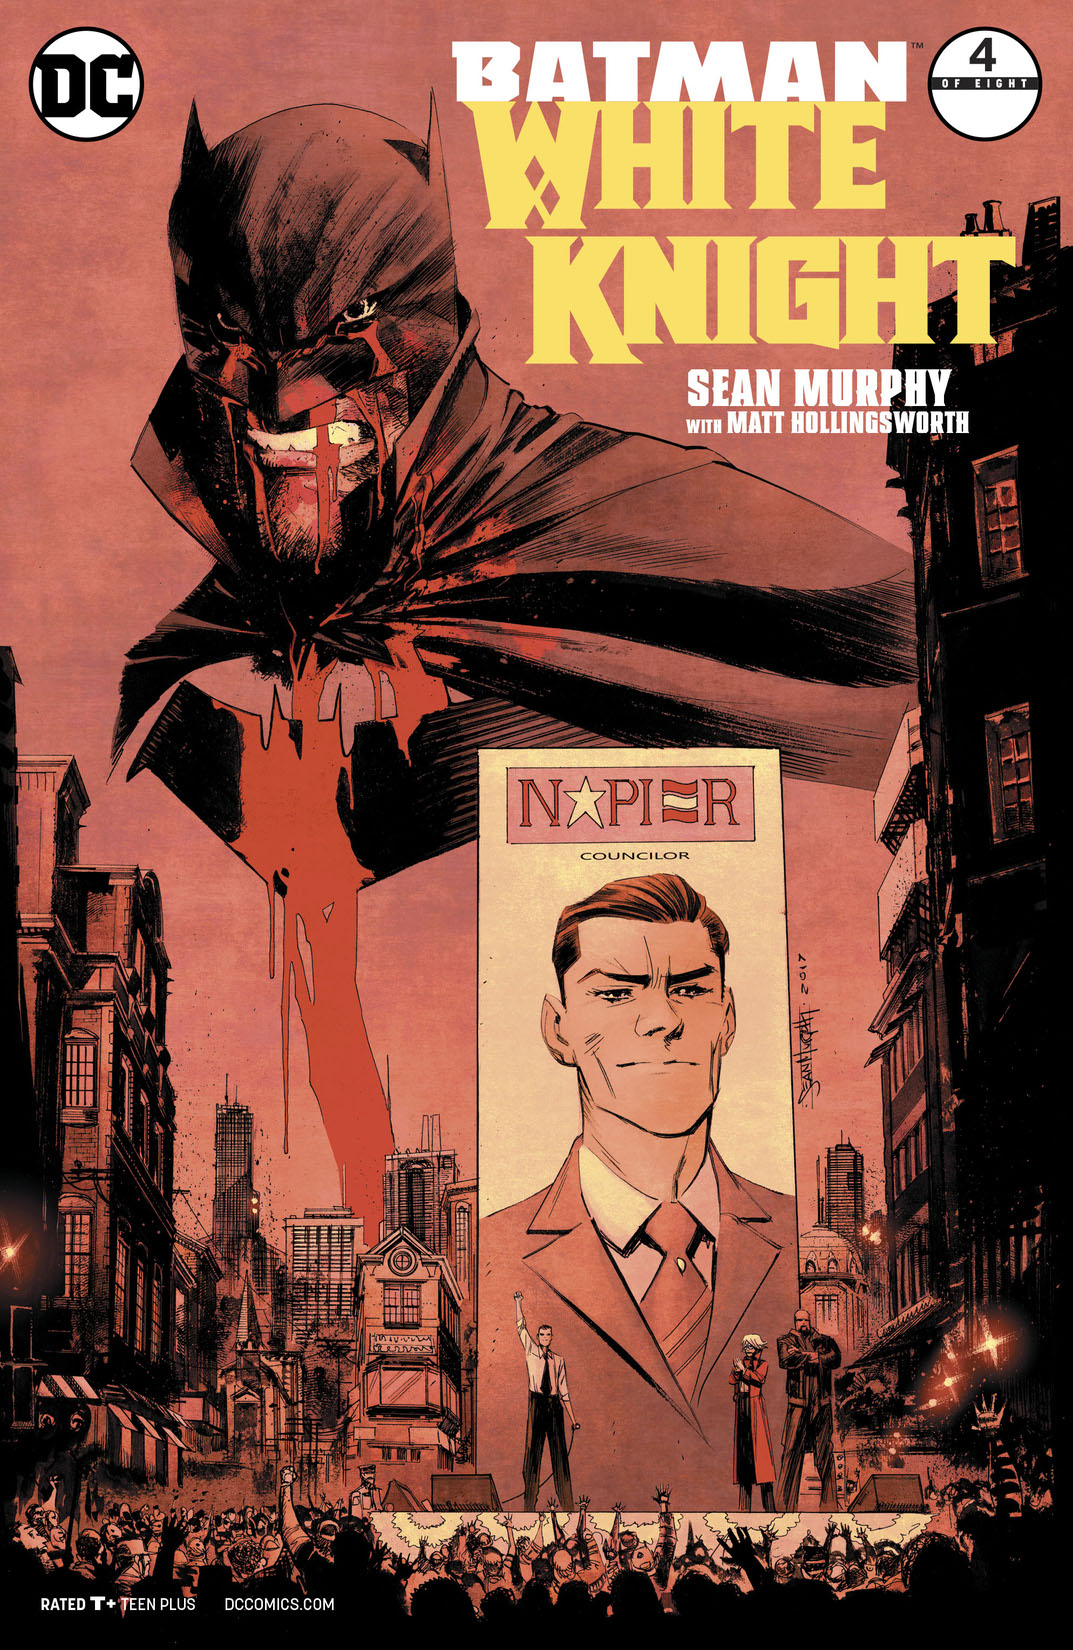 Batman: White Knight #4 preview images